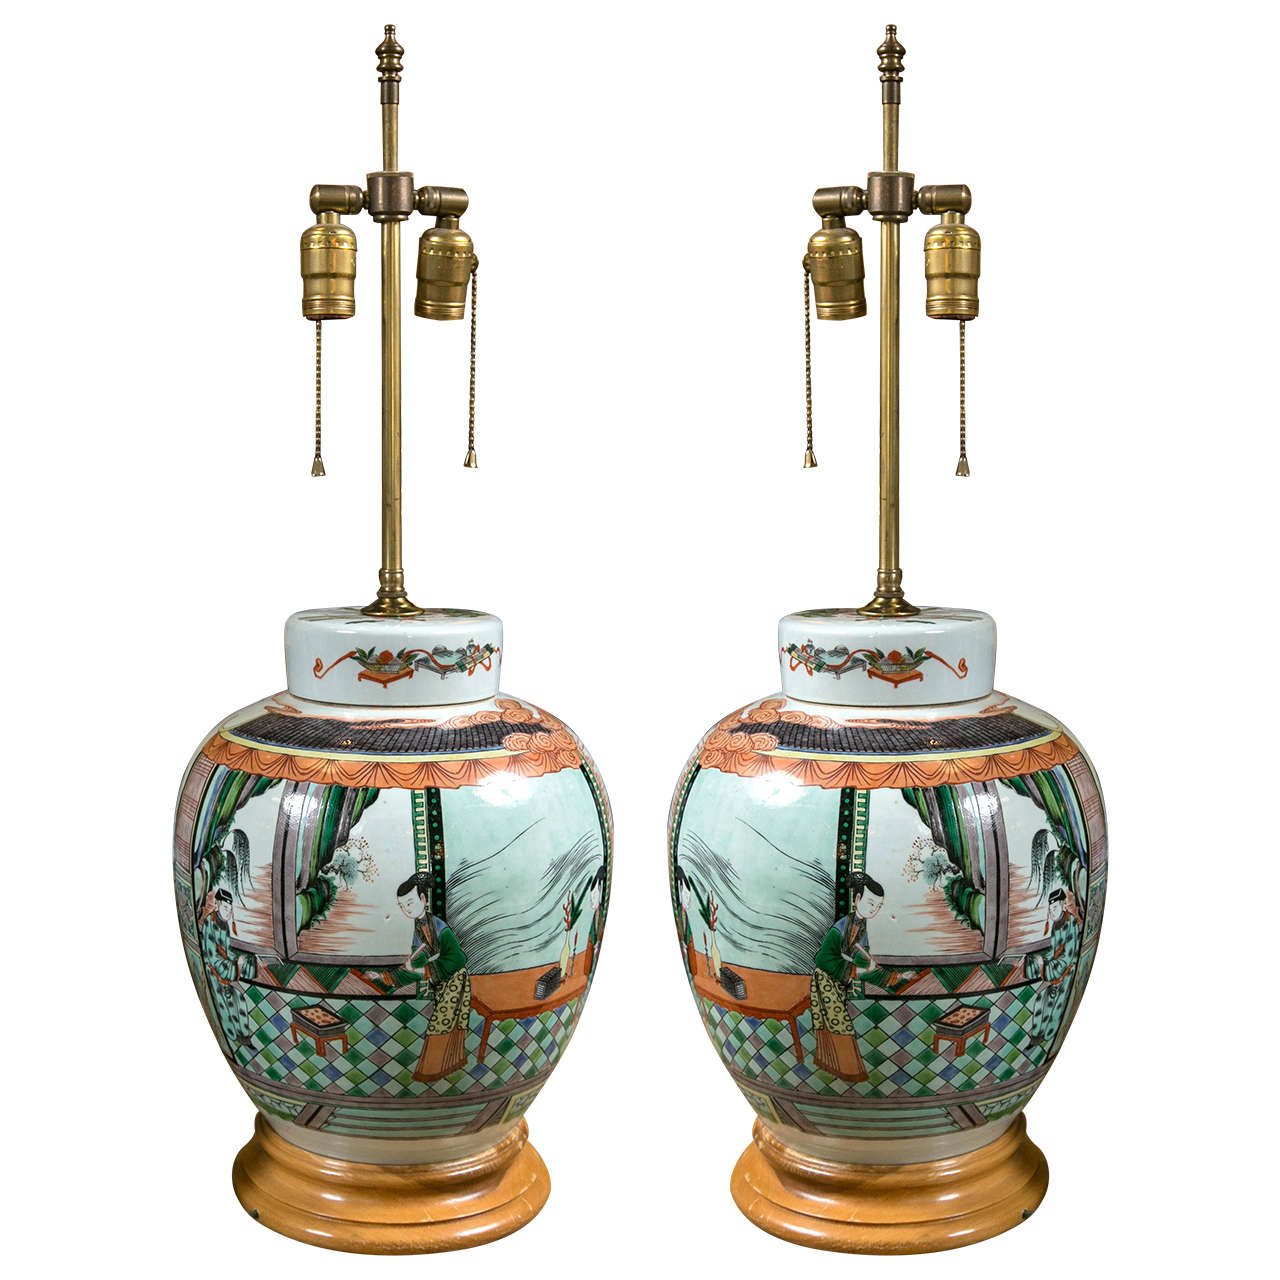 Pair of 19th Century Chinese Porcelain Ginger Jar Lamps